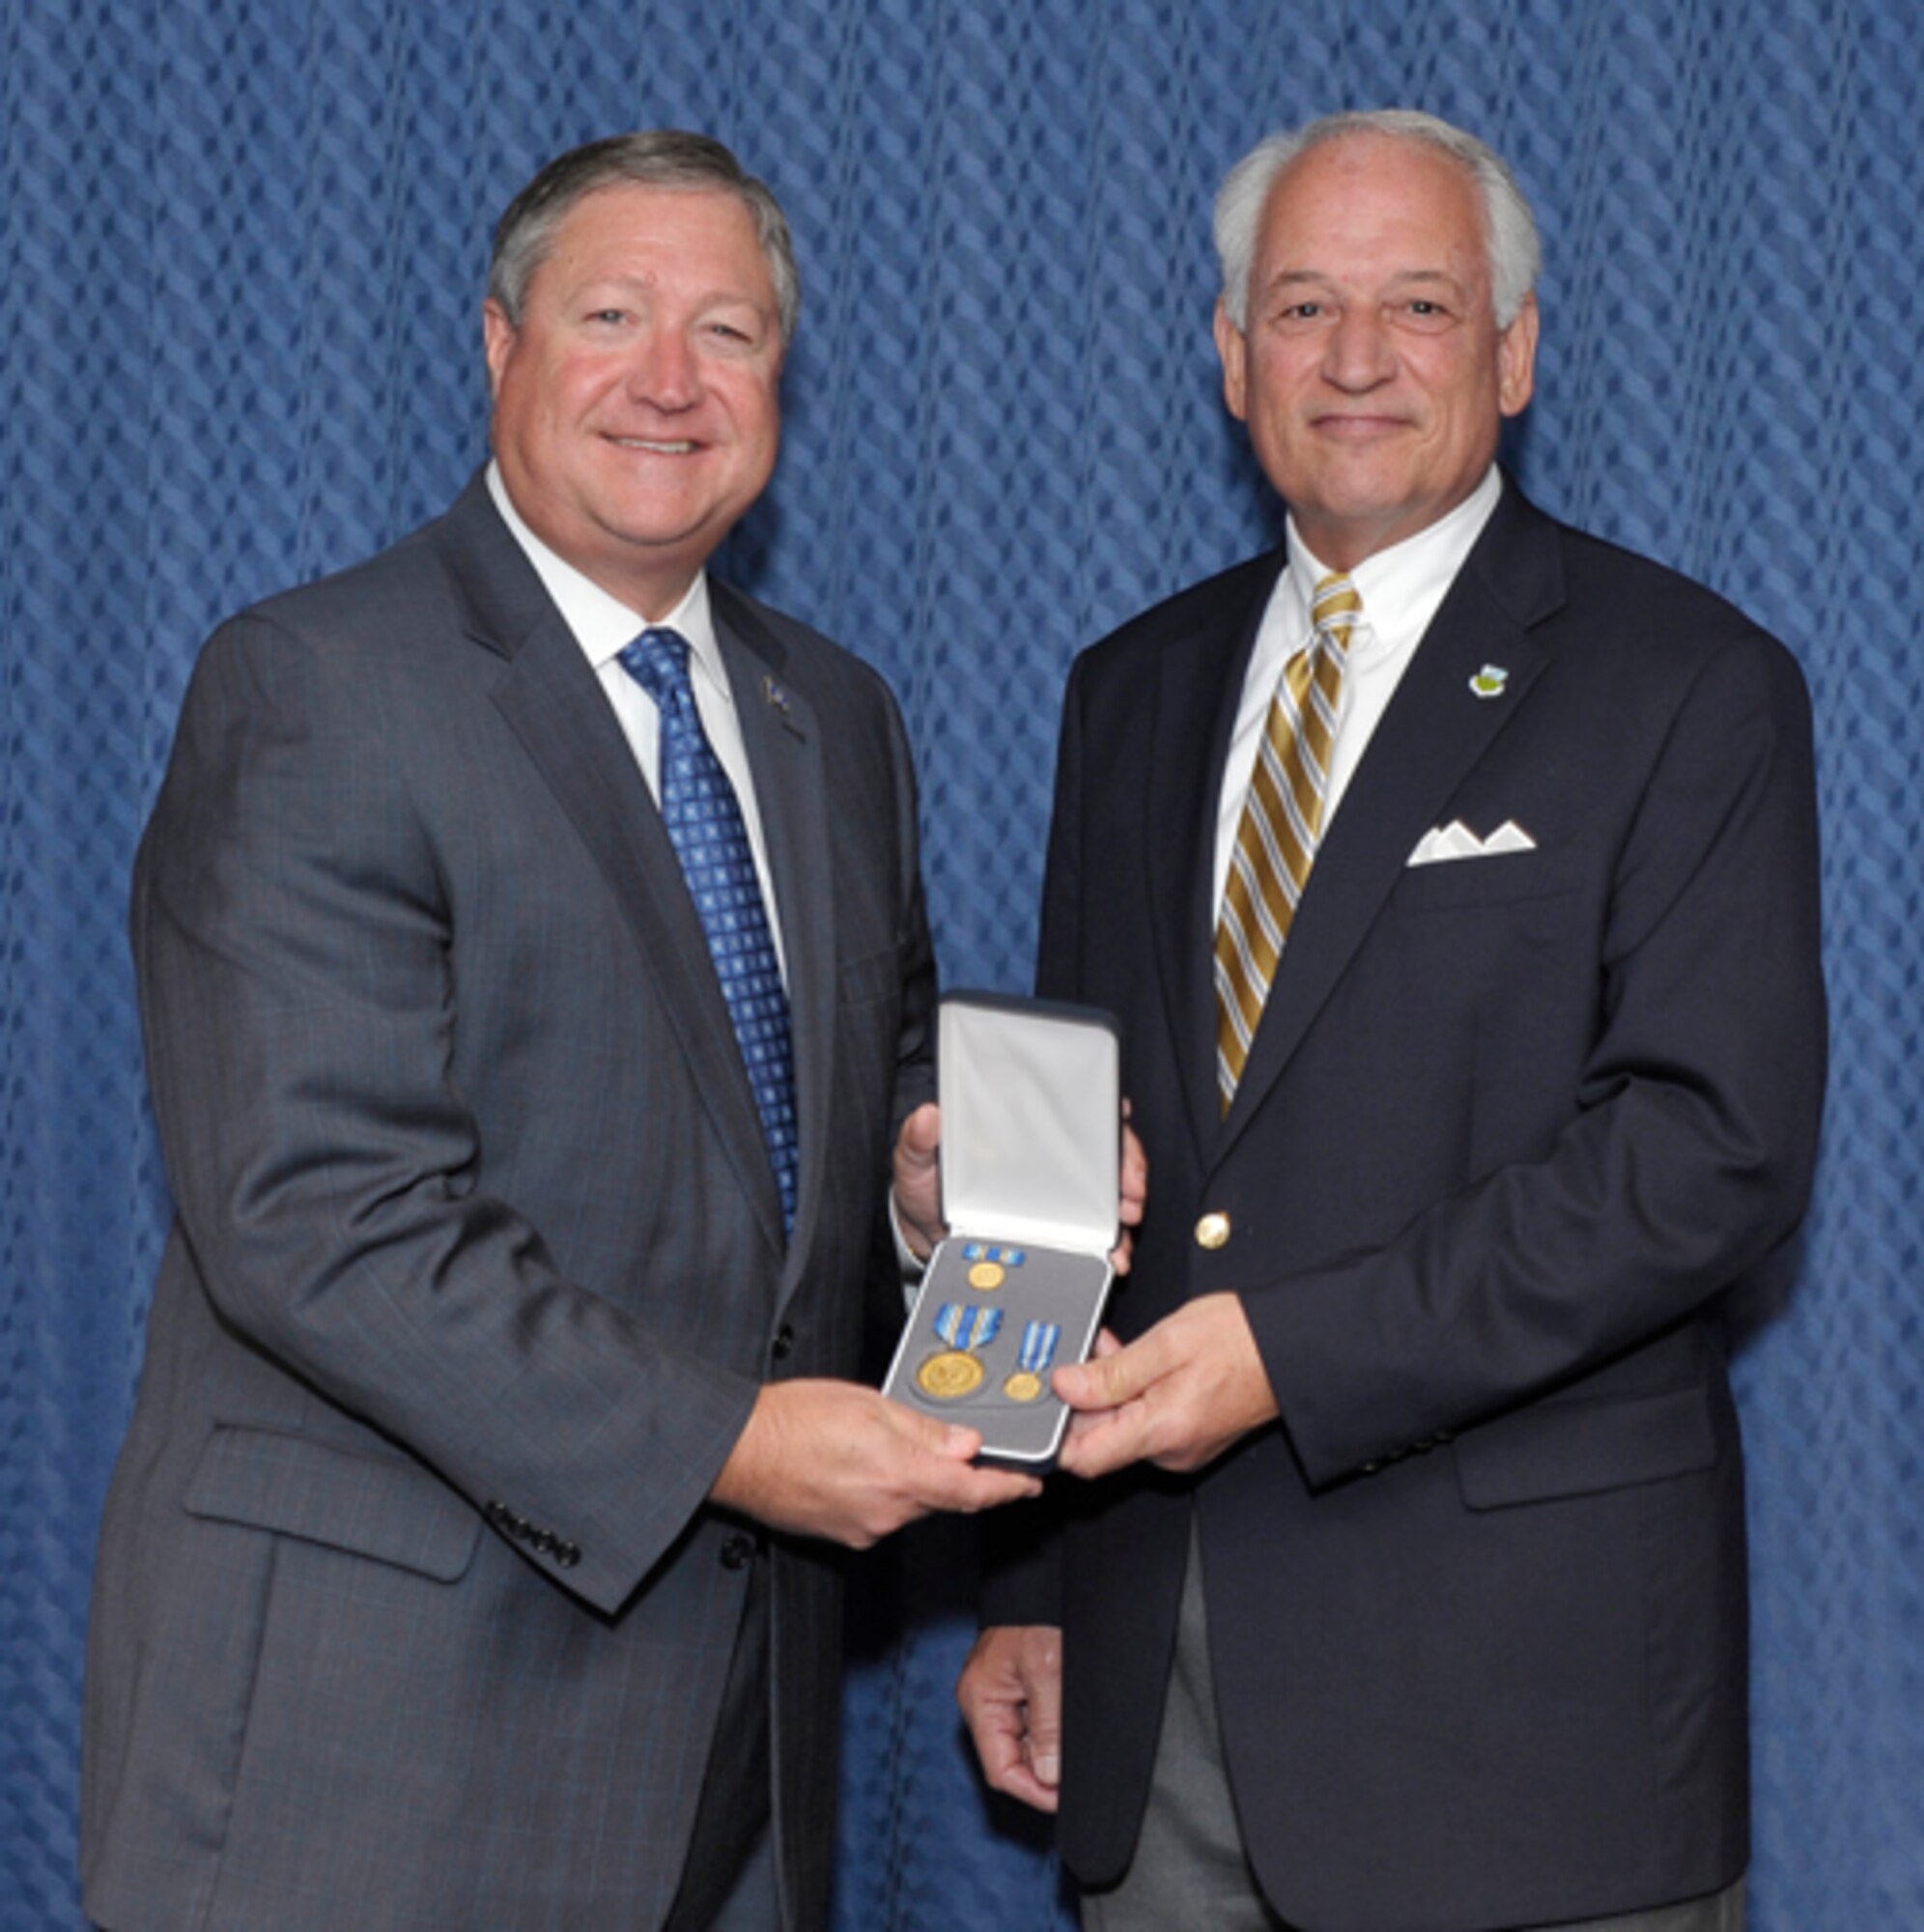 The Secretary of the Air Force, the Honorable Michael Donley, presents the Distinguished Public Service Award to Dr. Jack Hawkins in a ceremony held at the Pentagon on Sept. 6. Dr. Hawkins is the former chair of the Air University Board of Visitors. (Photo by Michael J. Pausic) 